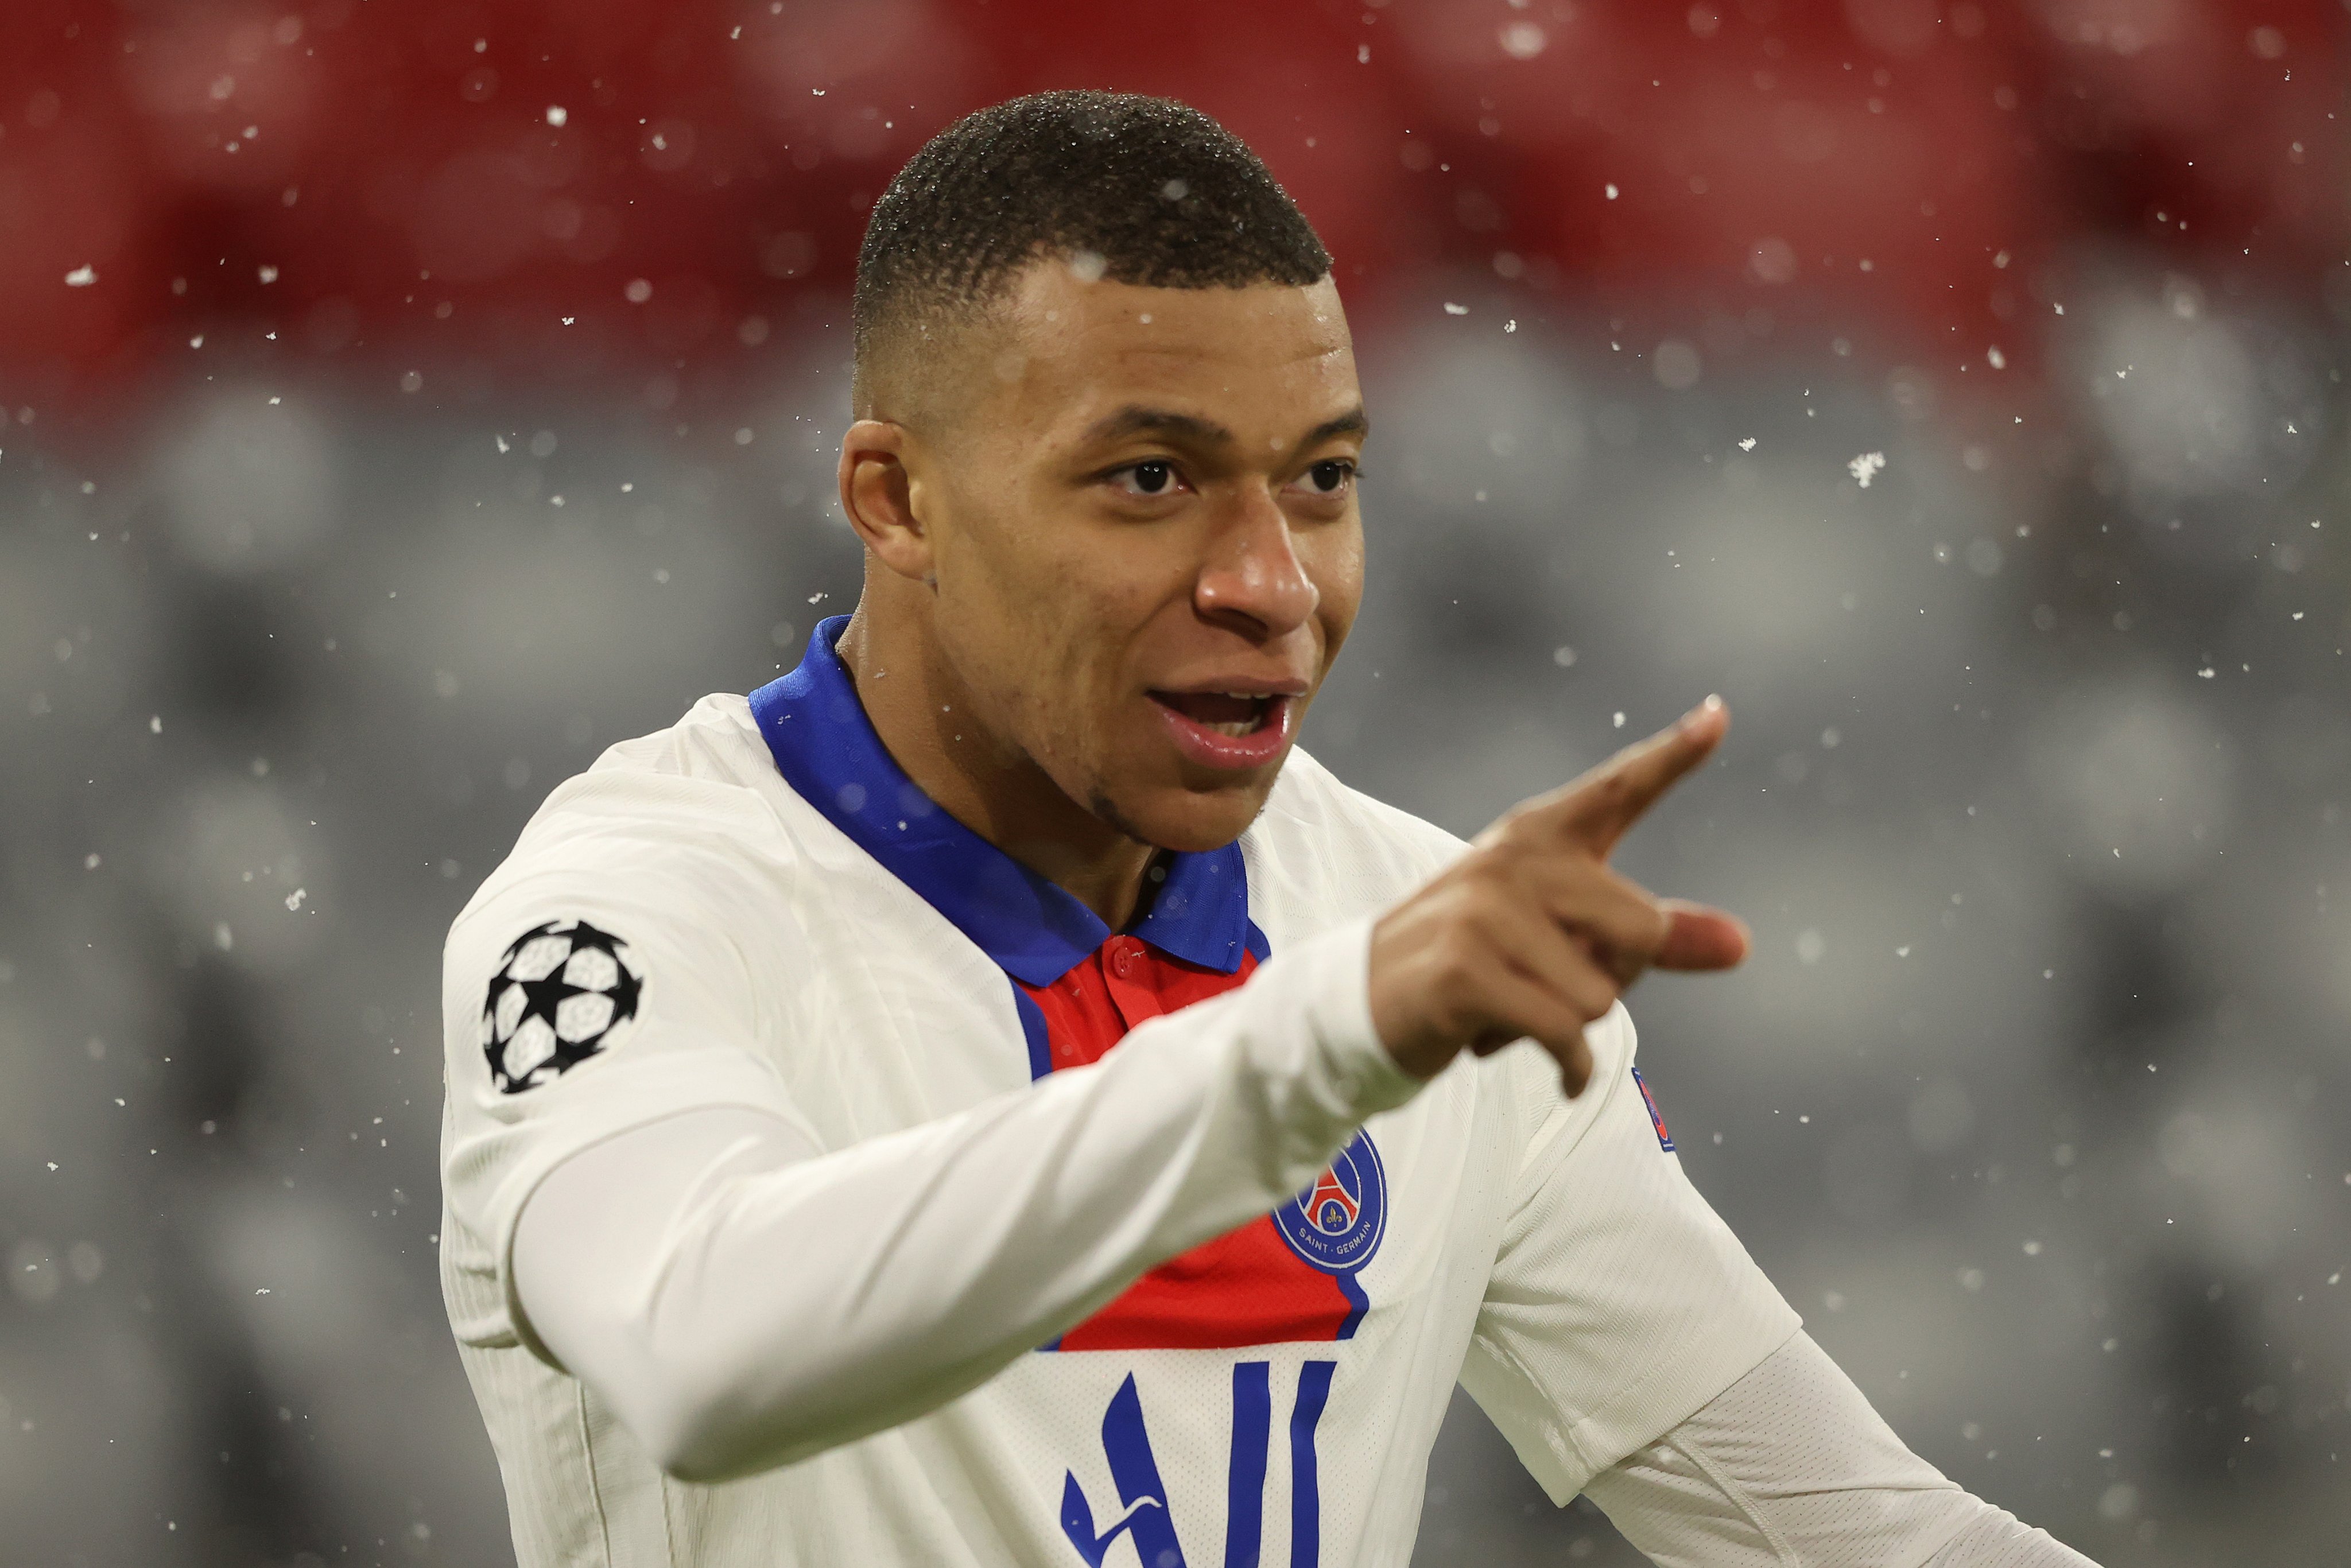 Watch: Kylian Mbappe scores again to break Thierry Henry's record - Football Espana